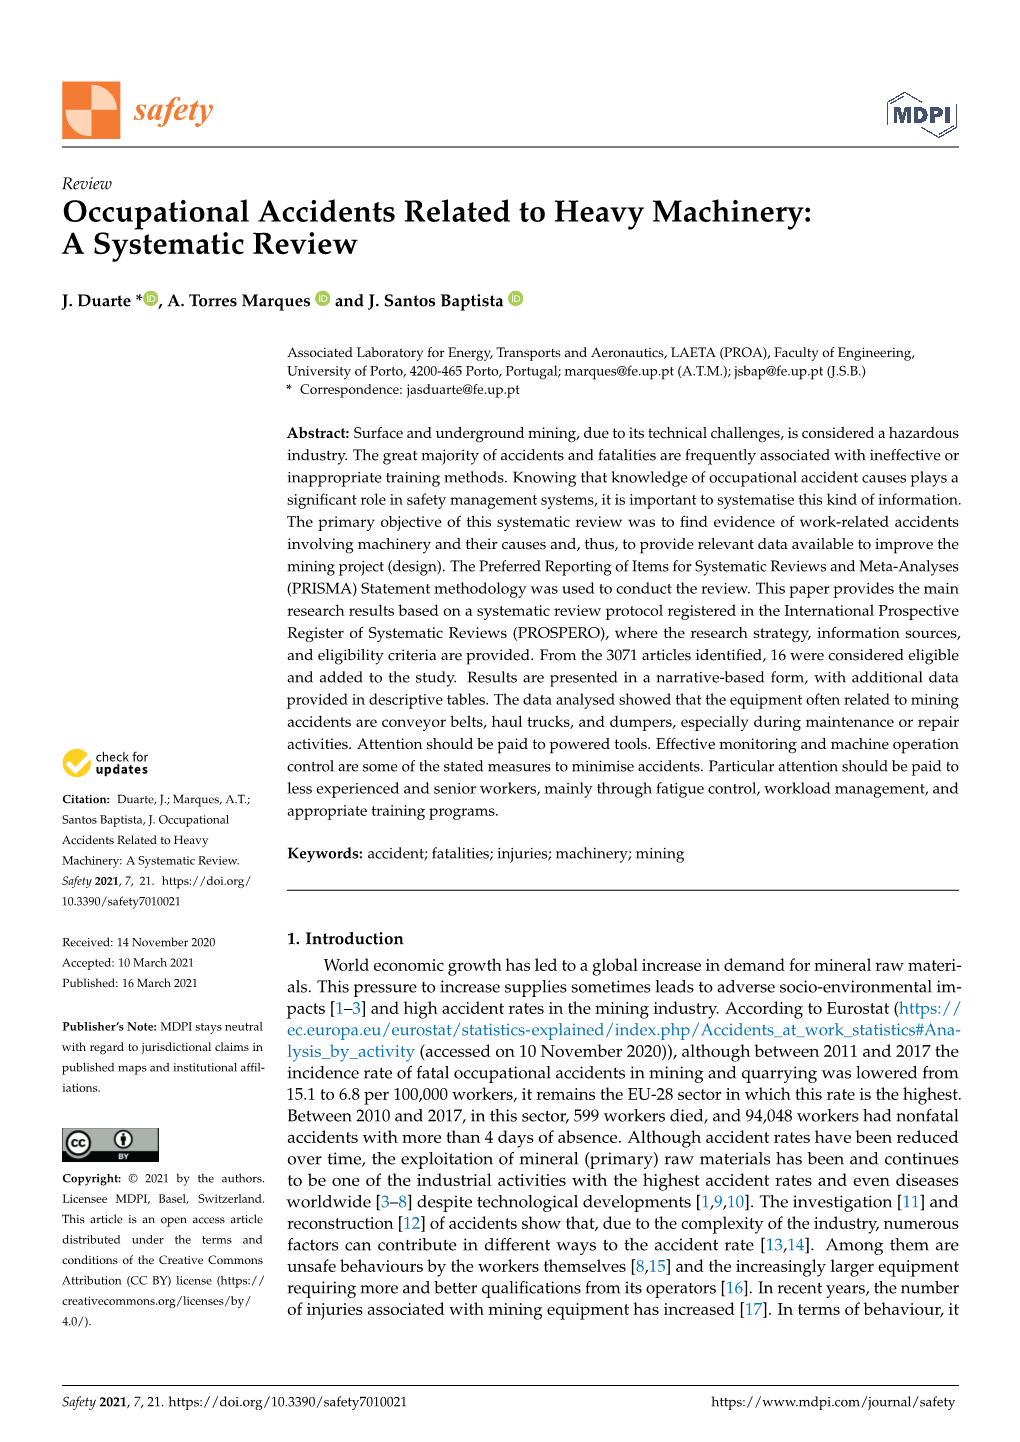 Occupational Accidents Related to Heavy Machinery: a Systematic Review